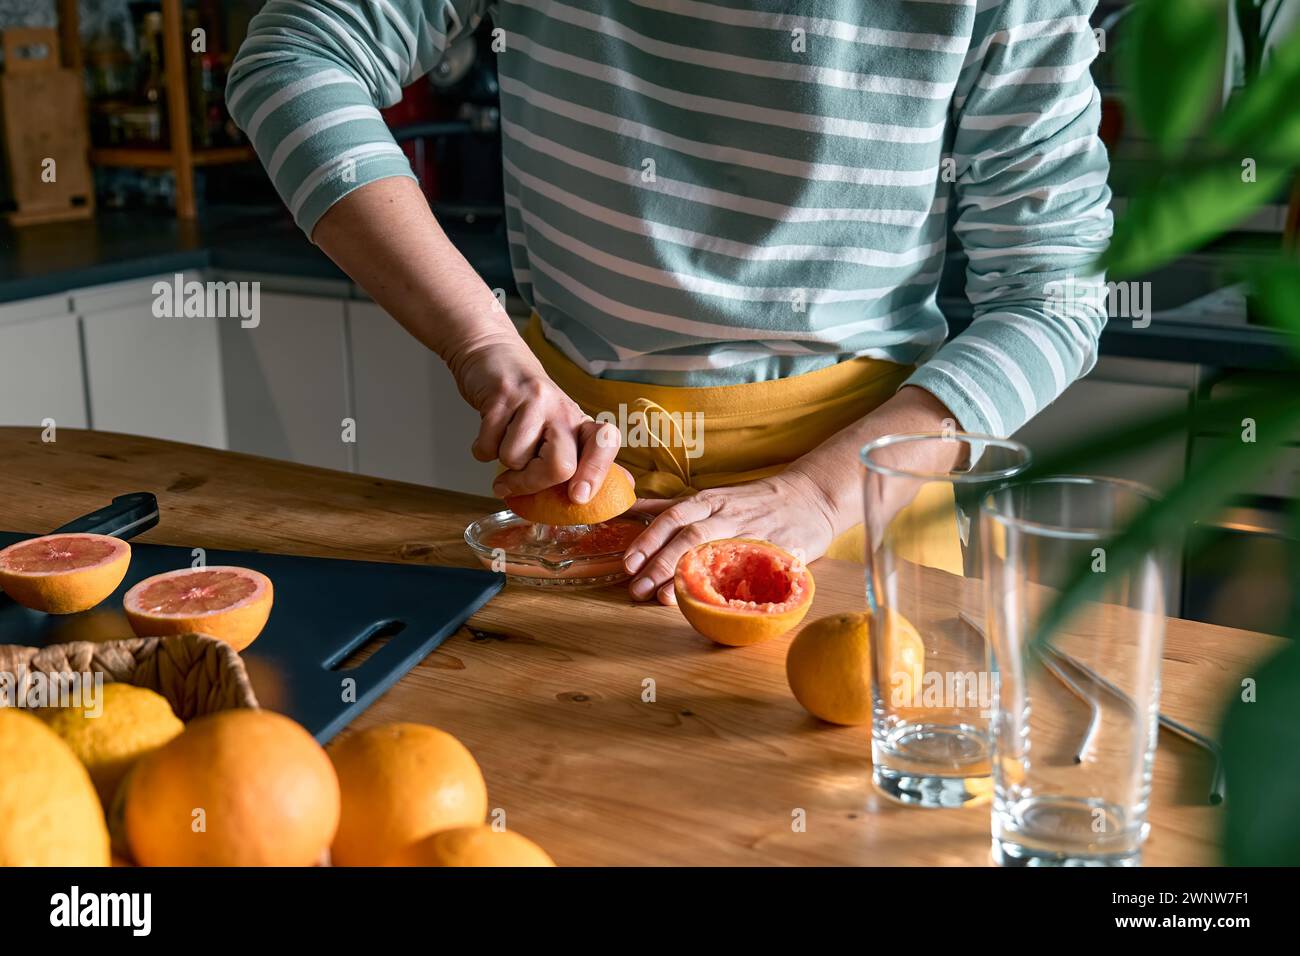 Female hands making homemade grapefruit juice with hand citrus juicer. Anonymous woman preparing fresh grapefruit juice in the kitchen. Stock Photo